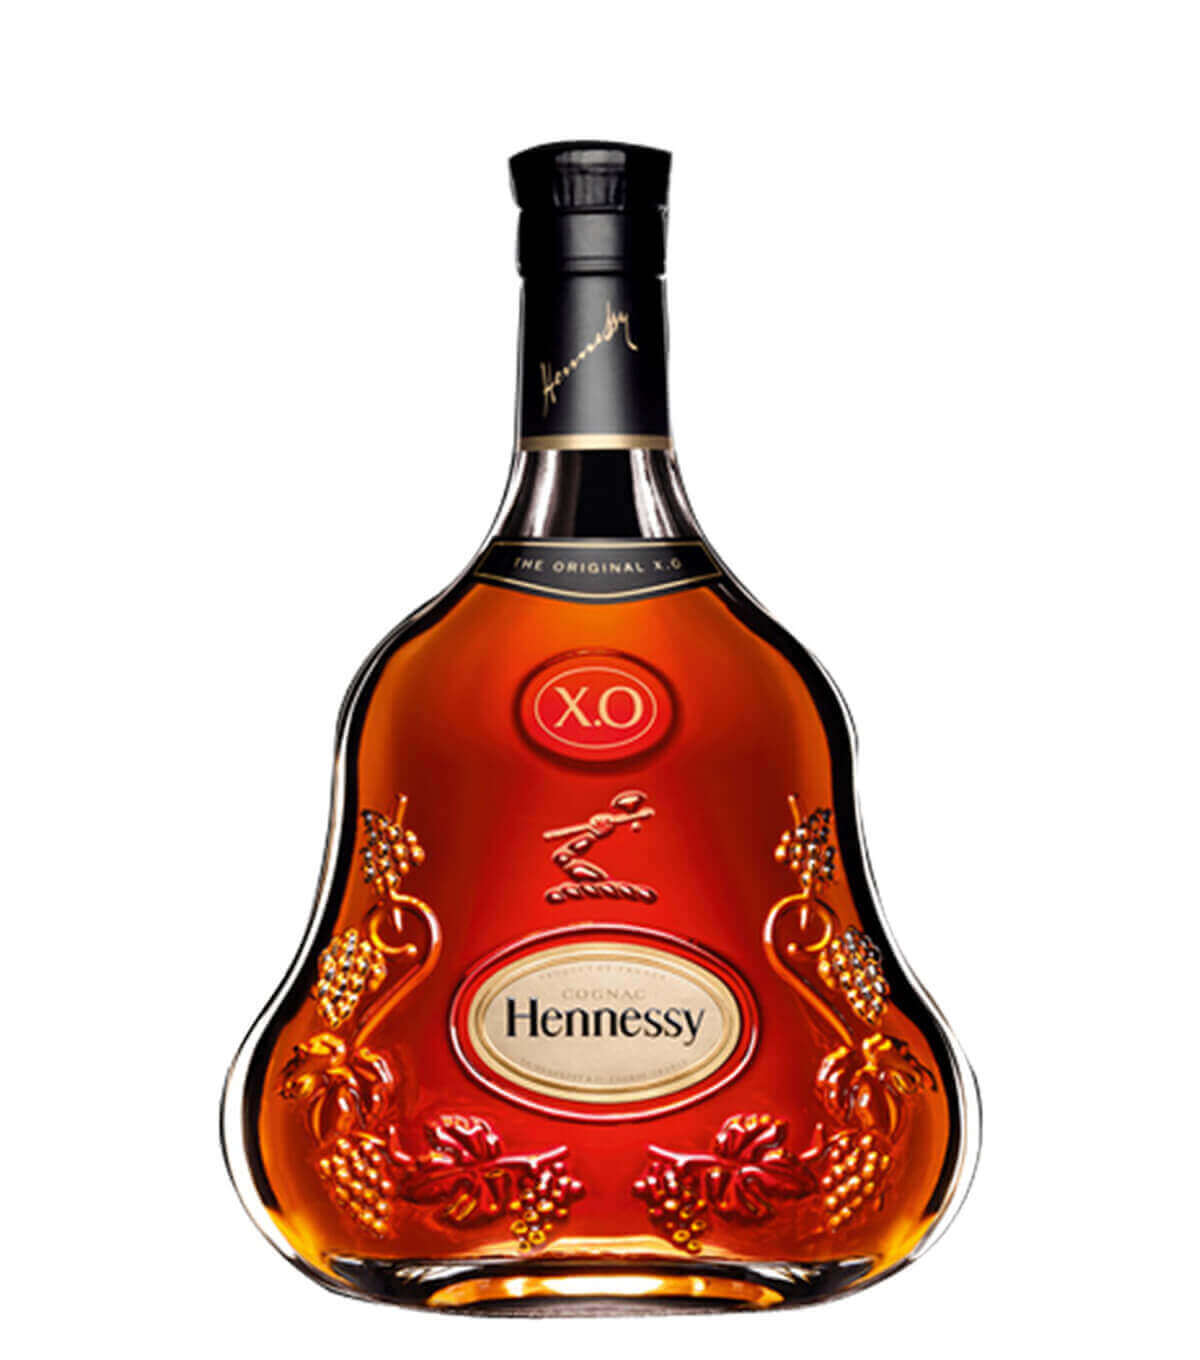 Wholesale Hennessy Products at Factory Prices from Manufacturers